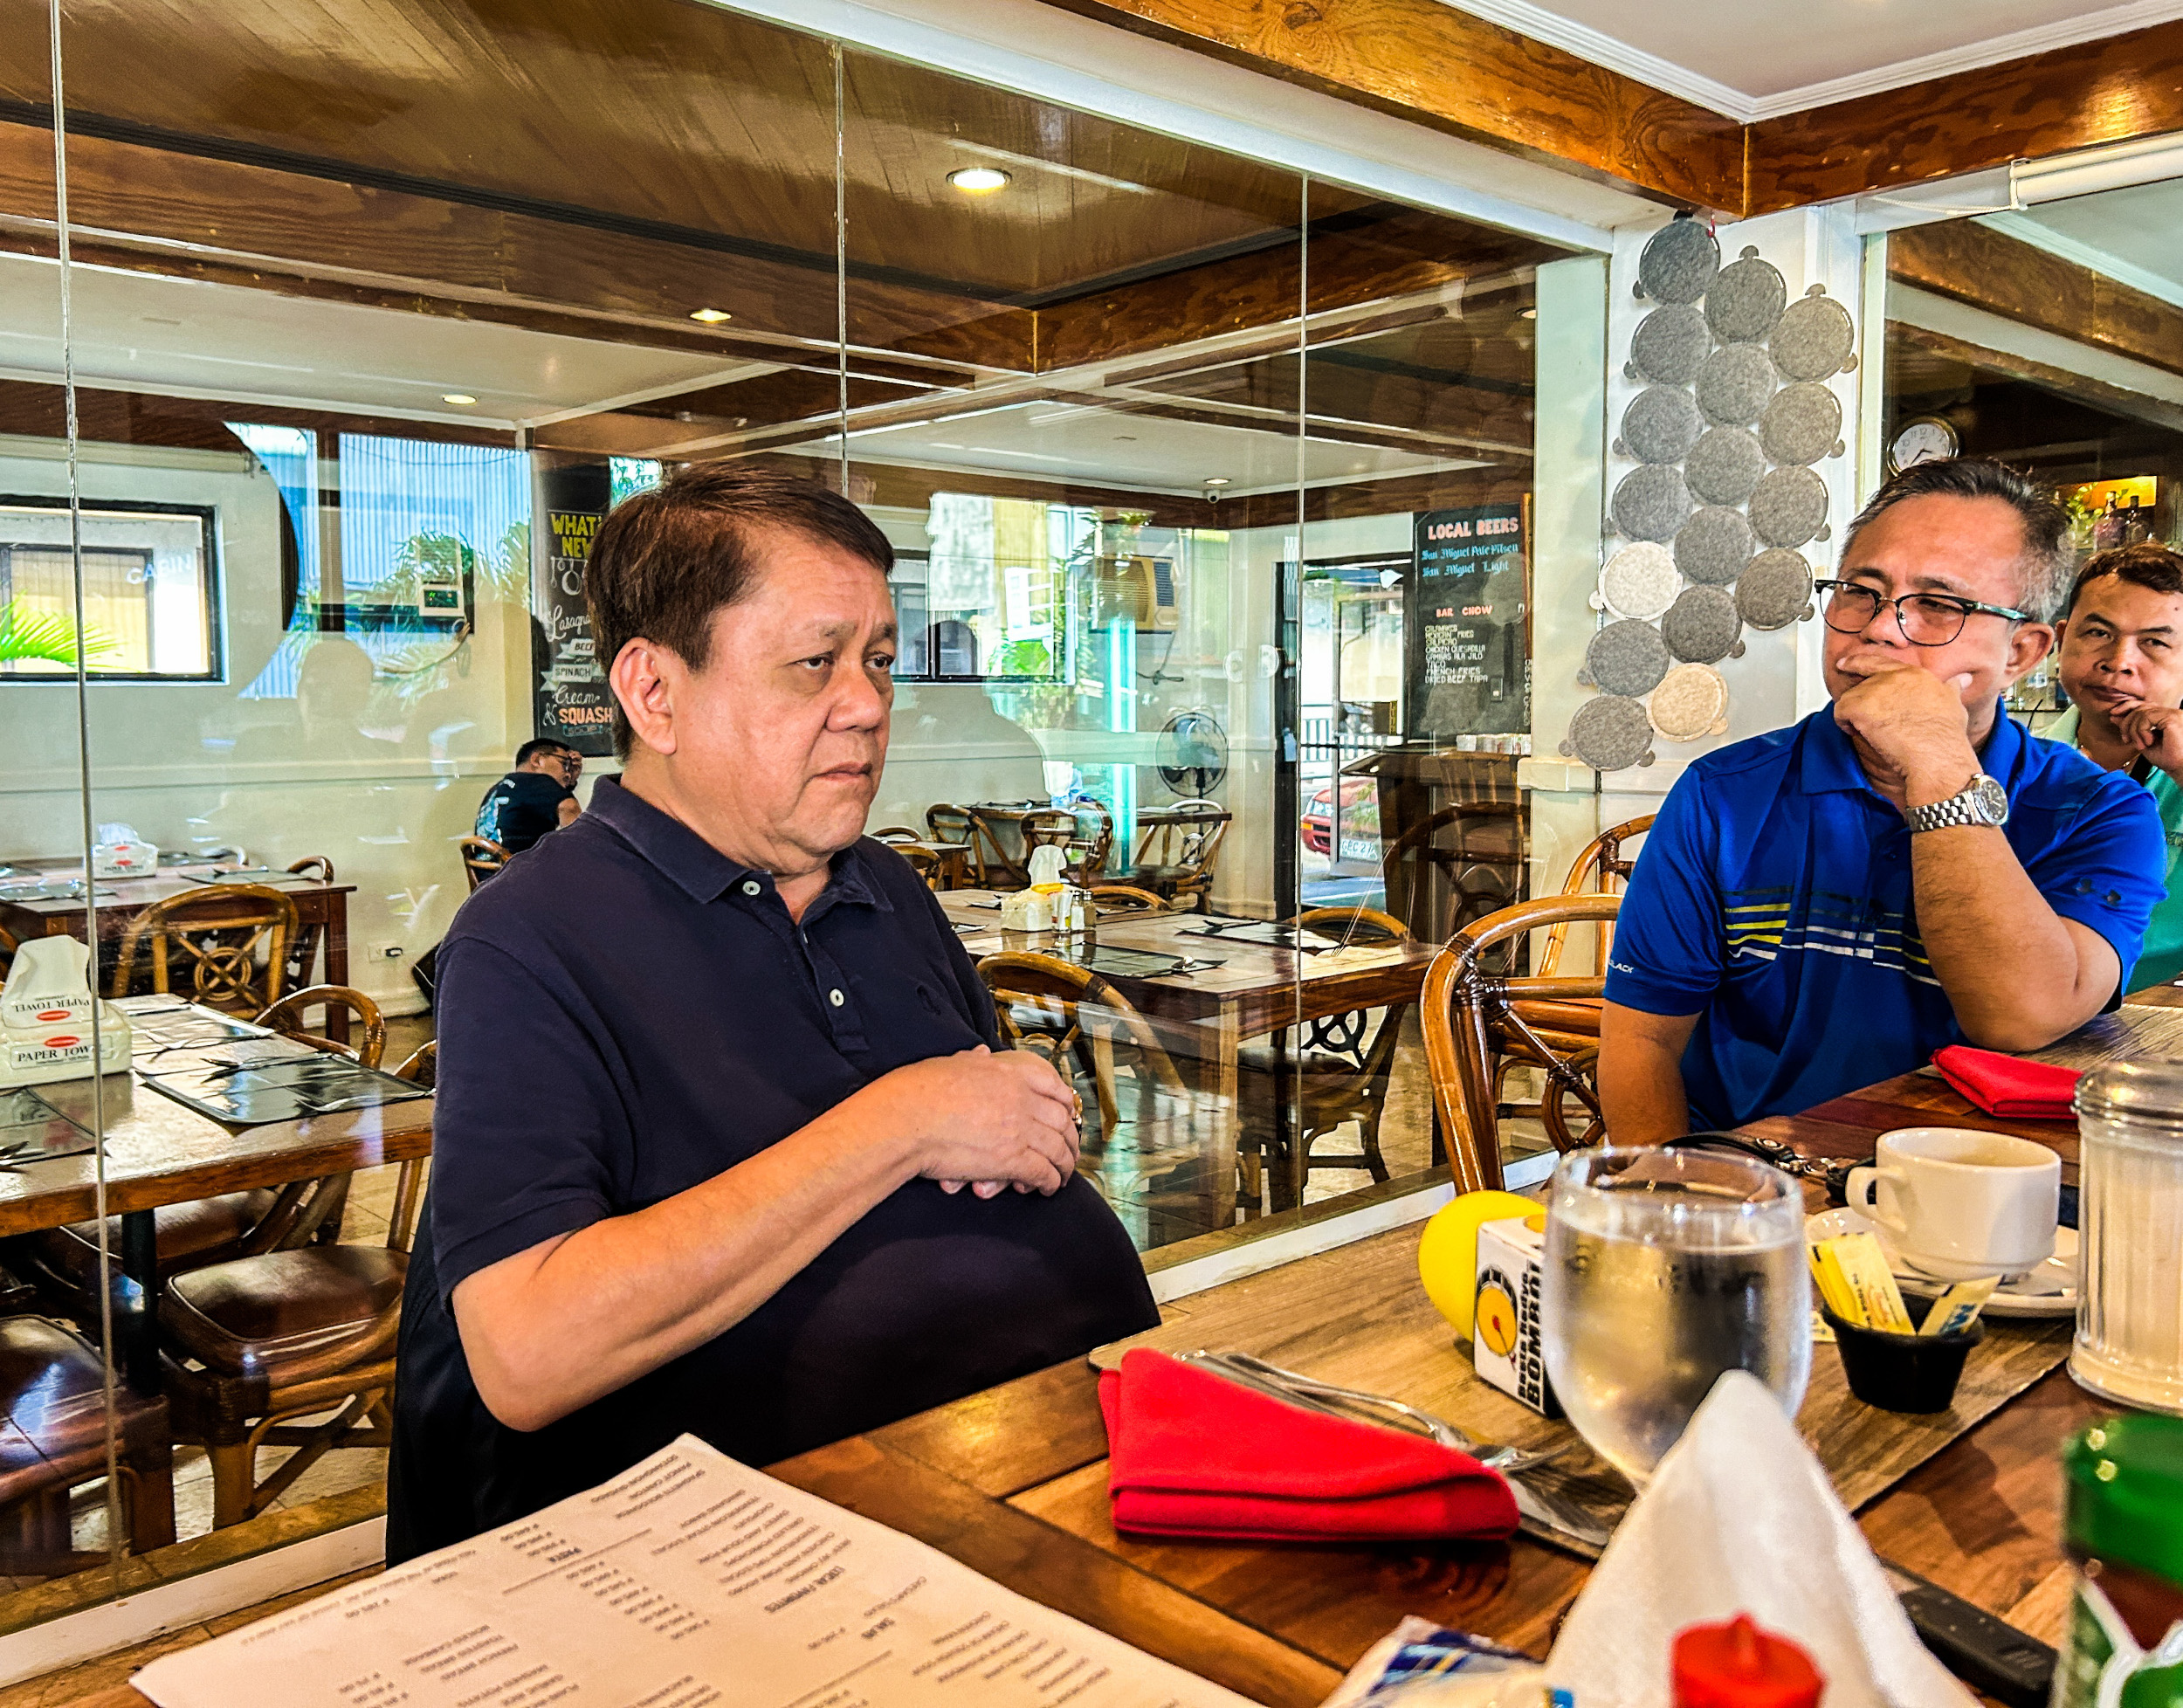 RAMA MUST GO. Former Cebu City Mayor Tomas Osmeña said Mayor Michael Rama, who once served as his vice mayor, has caused so much damage to Cebu City and must go. Osmeña said in a press conference he would support anyone who runs against Rama in the next elections.